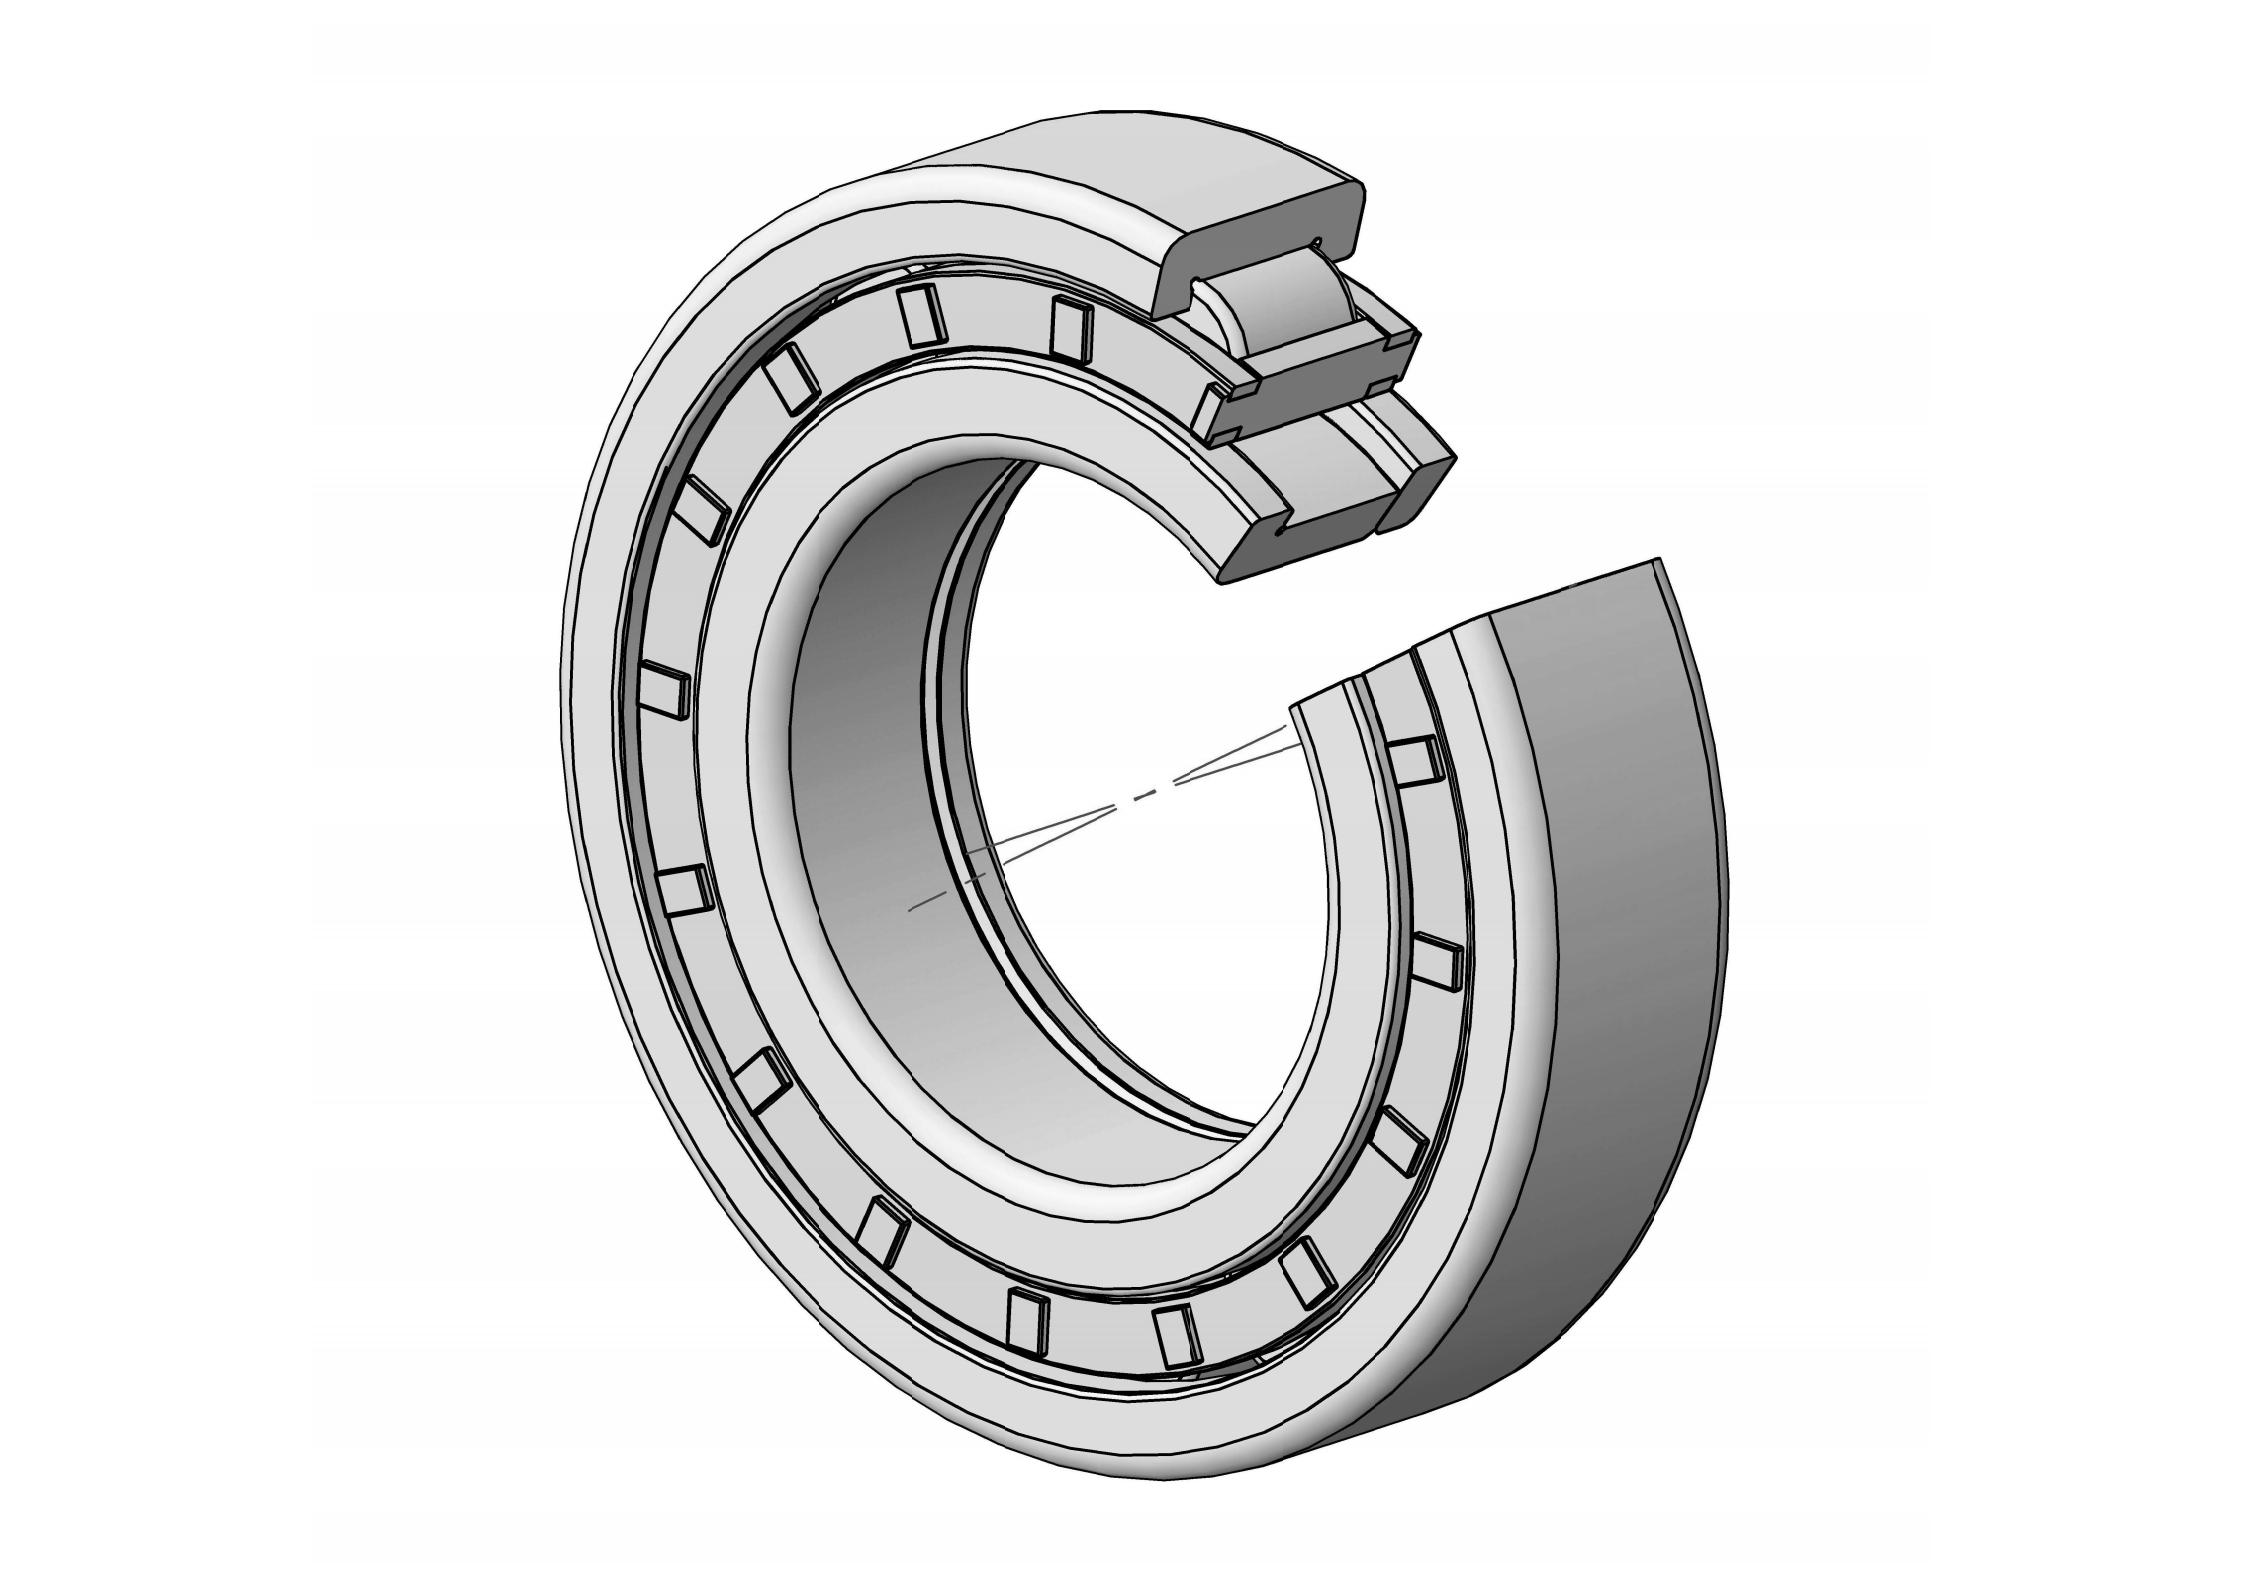 NUP2207-E Single Row Cylindrical roller bearing 